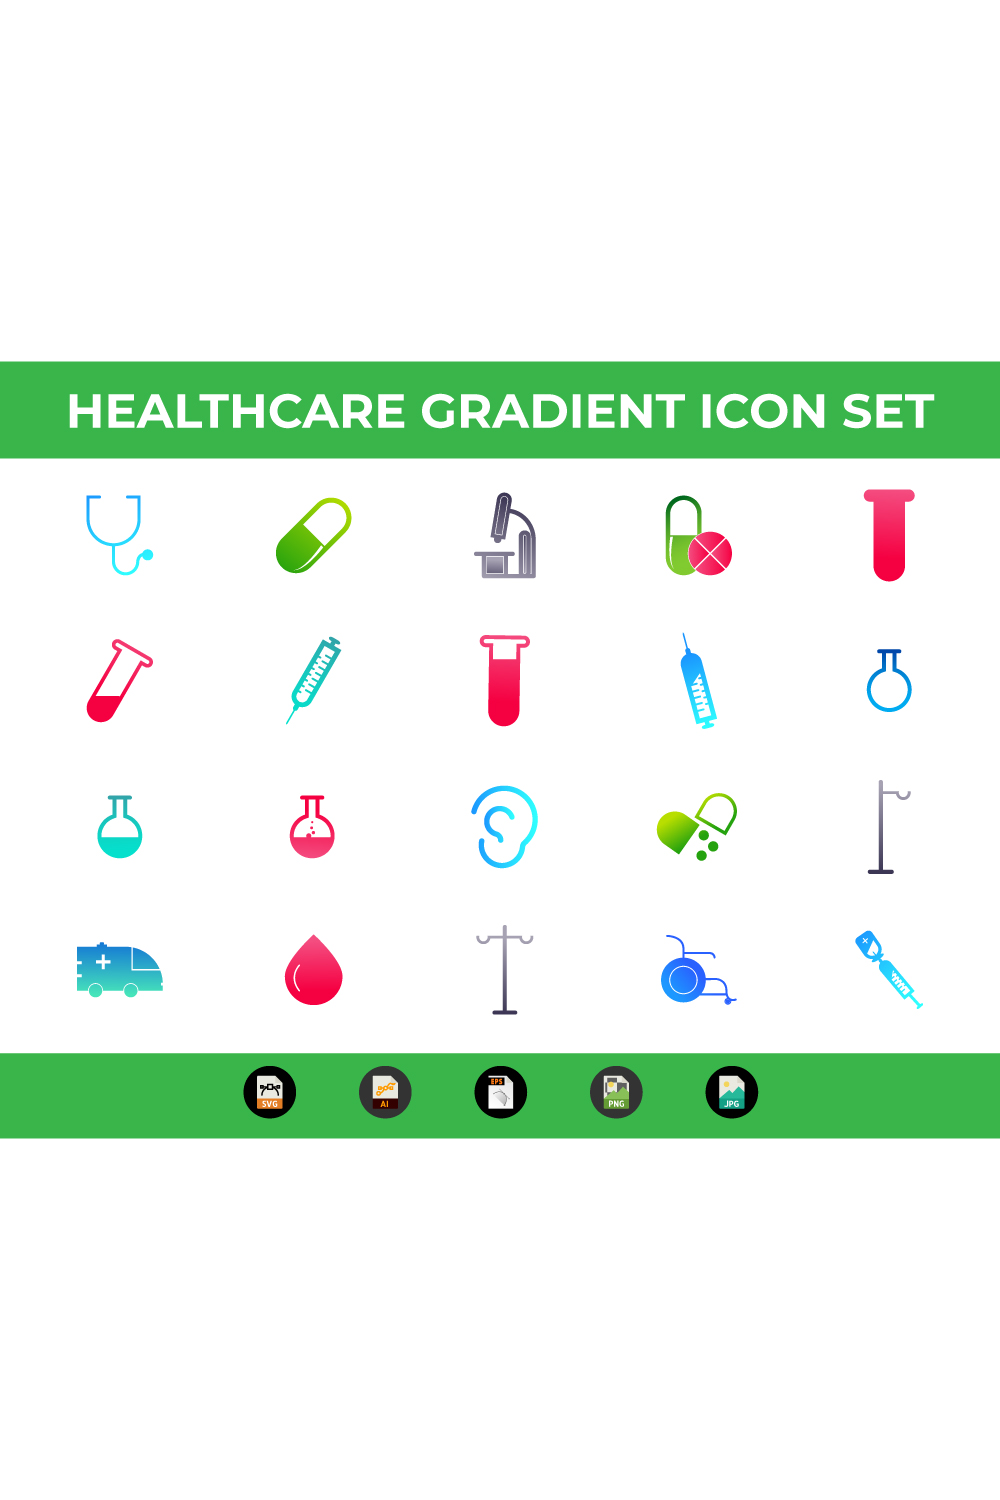 Pinterest images with medical icons set.